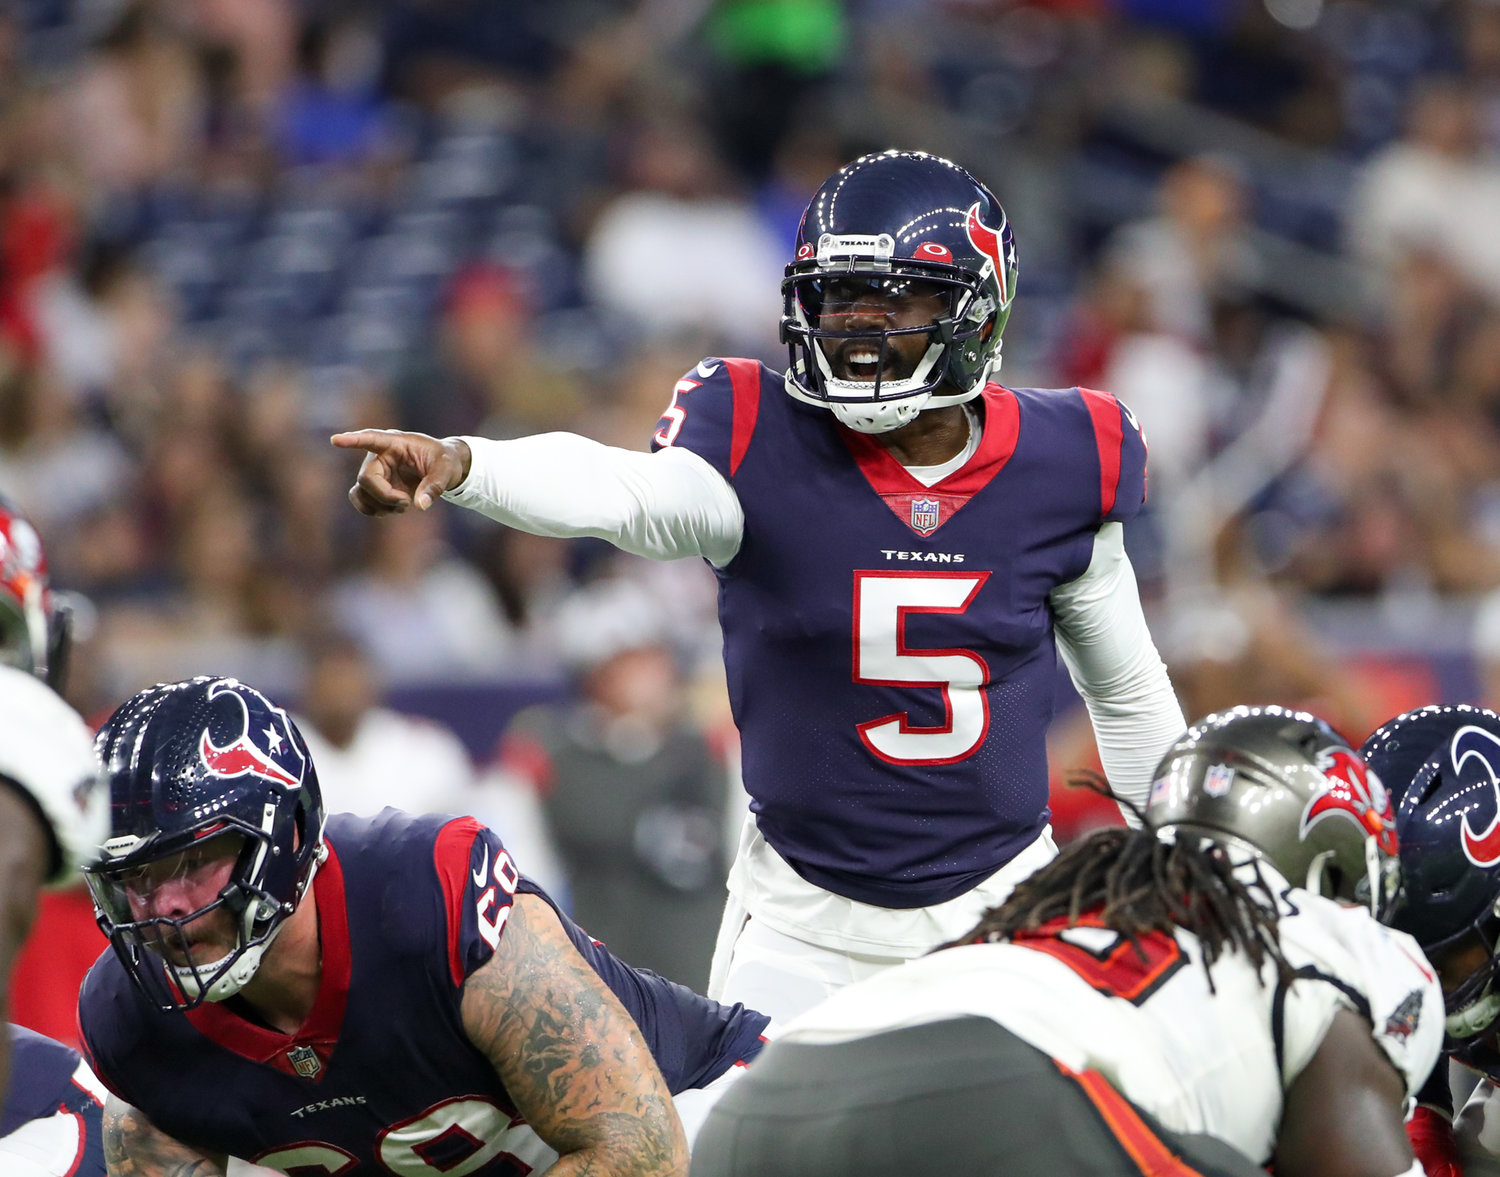 Houston Texans quarterback Tyrod Taylor (5) at the line of scrimmage during an NFL preseason game between the Houston Texans and the Tampa Bay Buccaneers on August 28, 2021 in Houston, Texas.